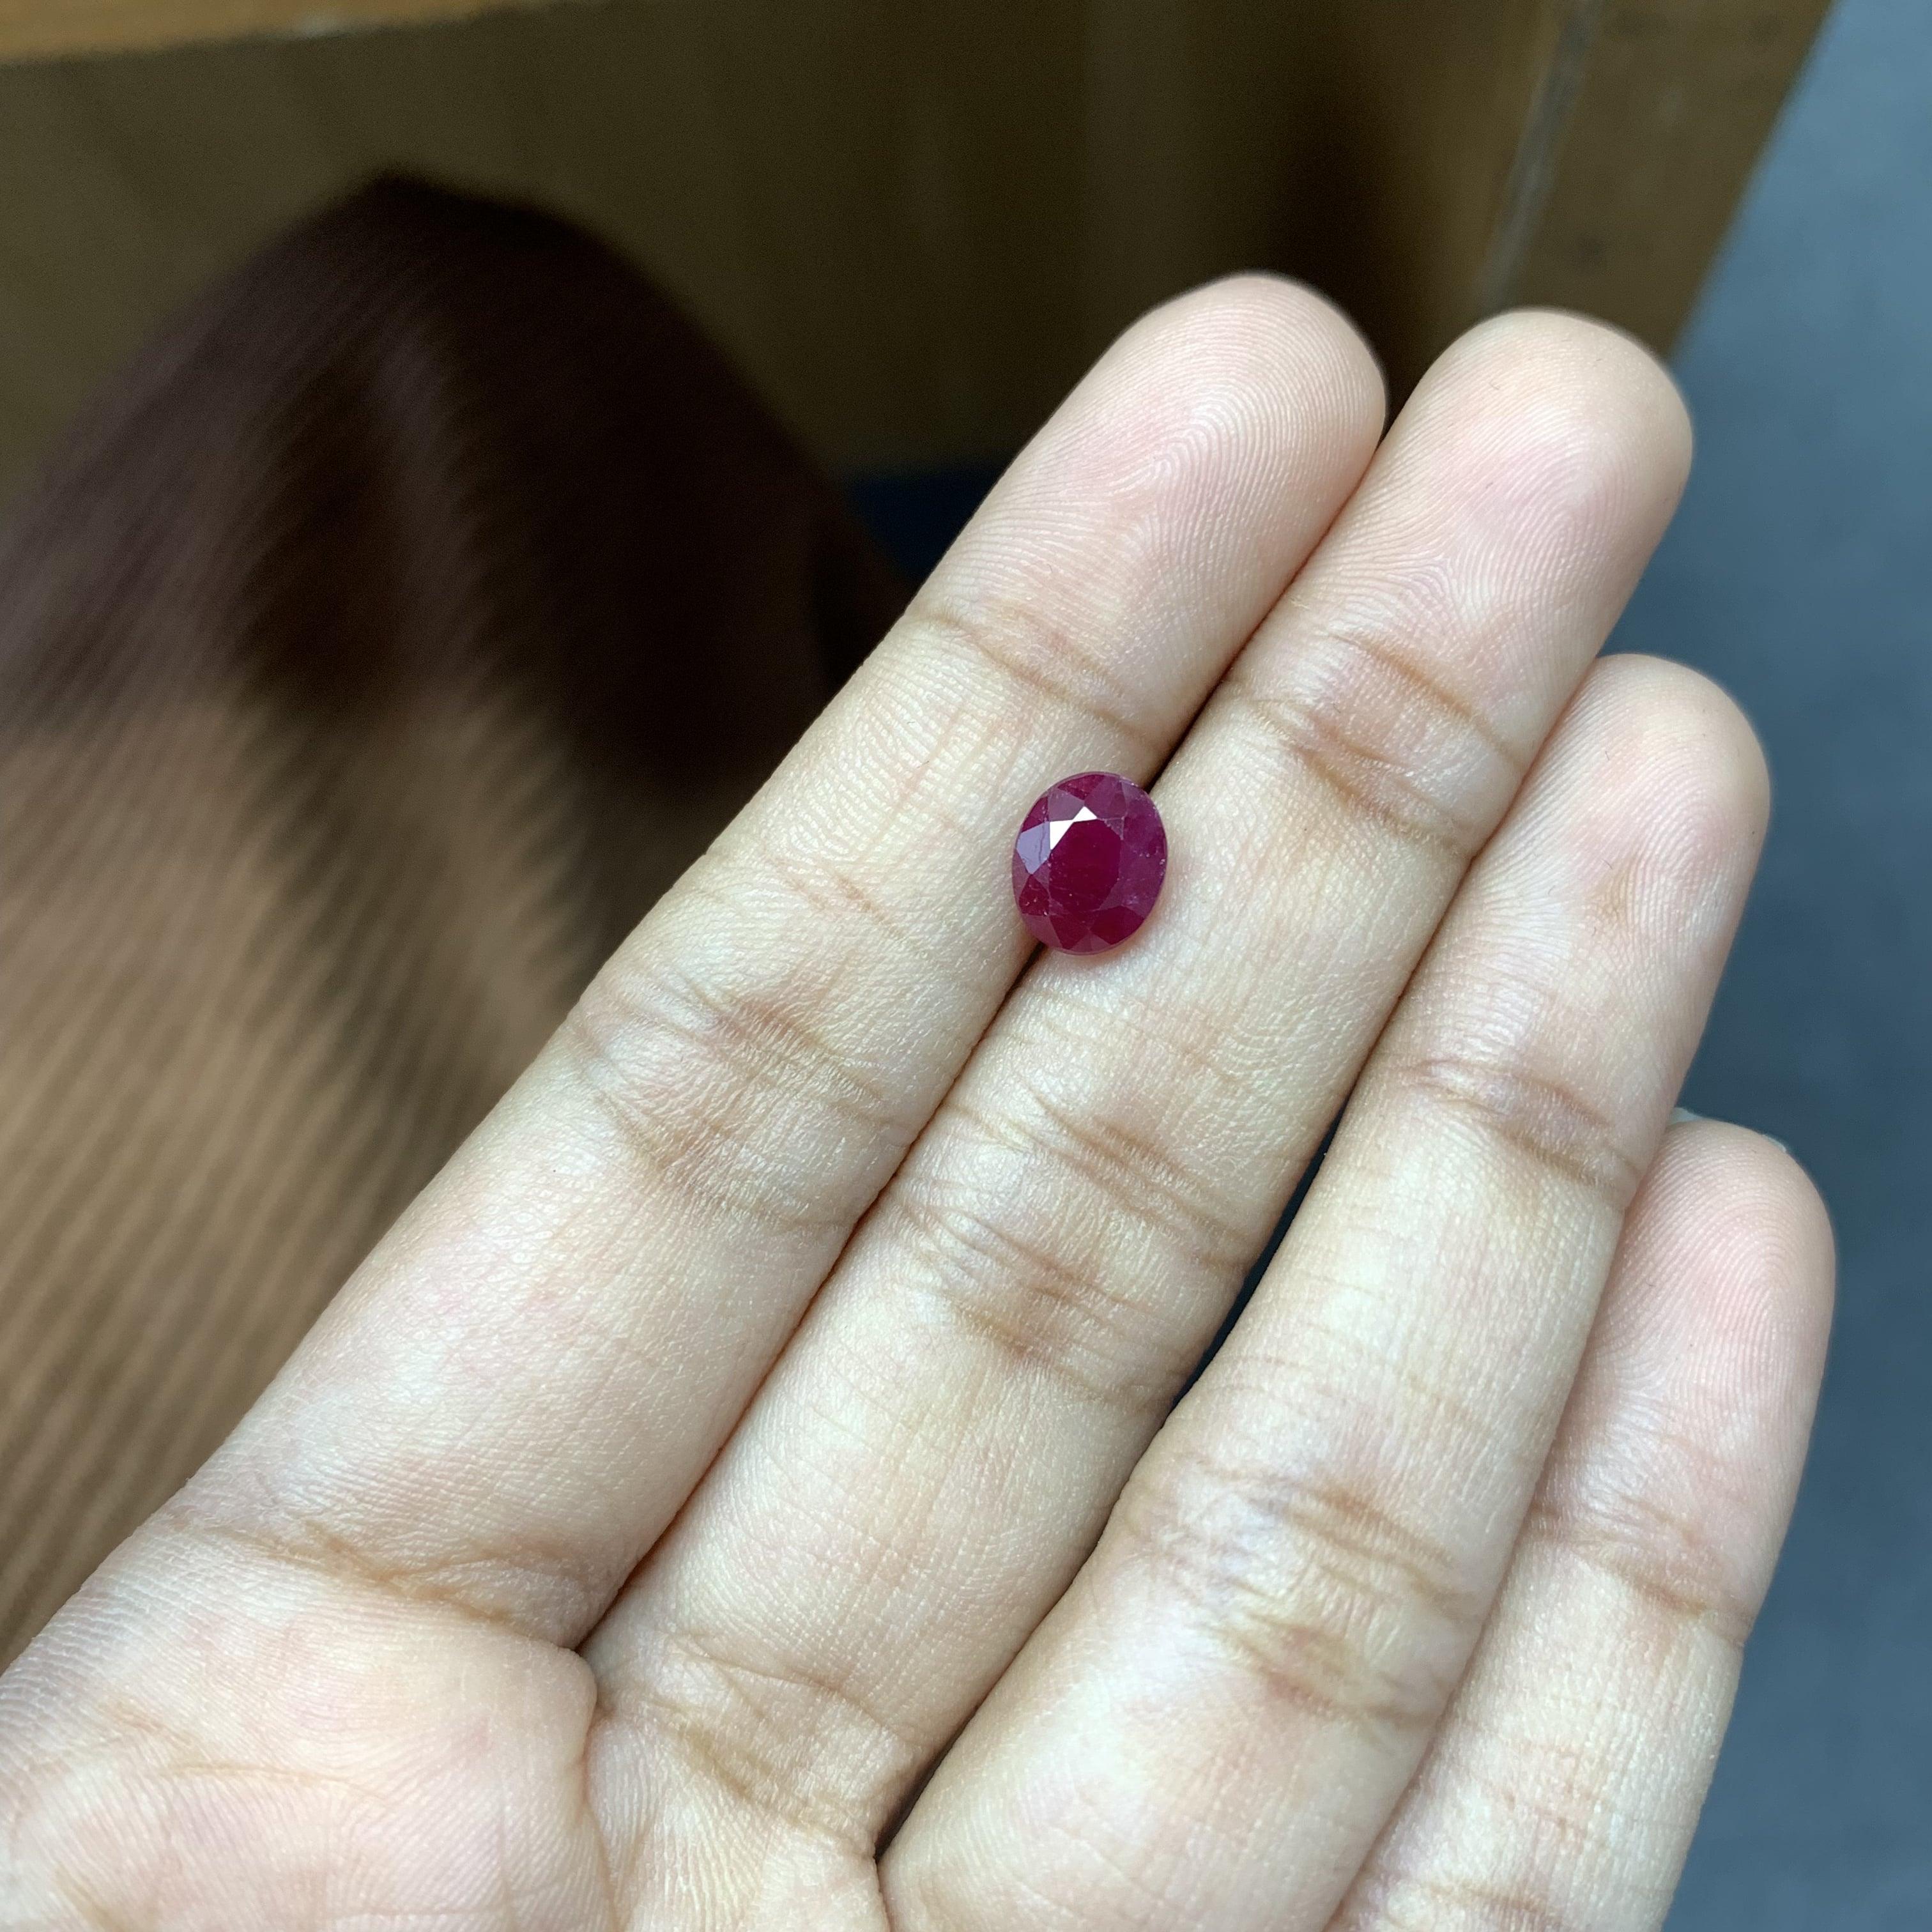 A stunning 1.78 Carat Ruby gemstone. It is completely natural and hasn't undergone any form of treatment. The ruby is an oval shape and it has a pigeon blood color that is absolutely gorgeous!

The measurements of the Ruby stone are 7.80 x 6.52 x